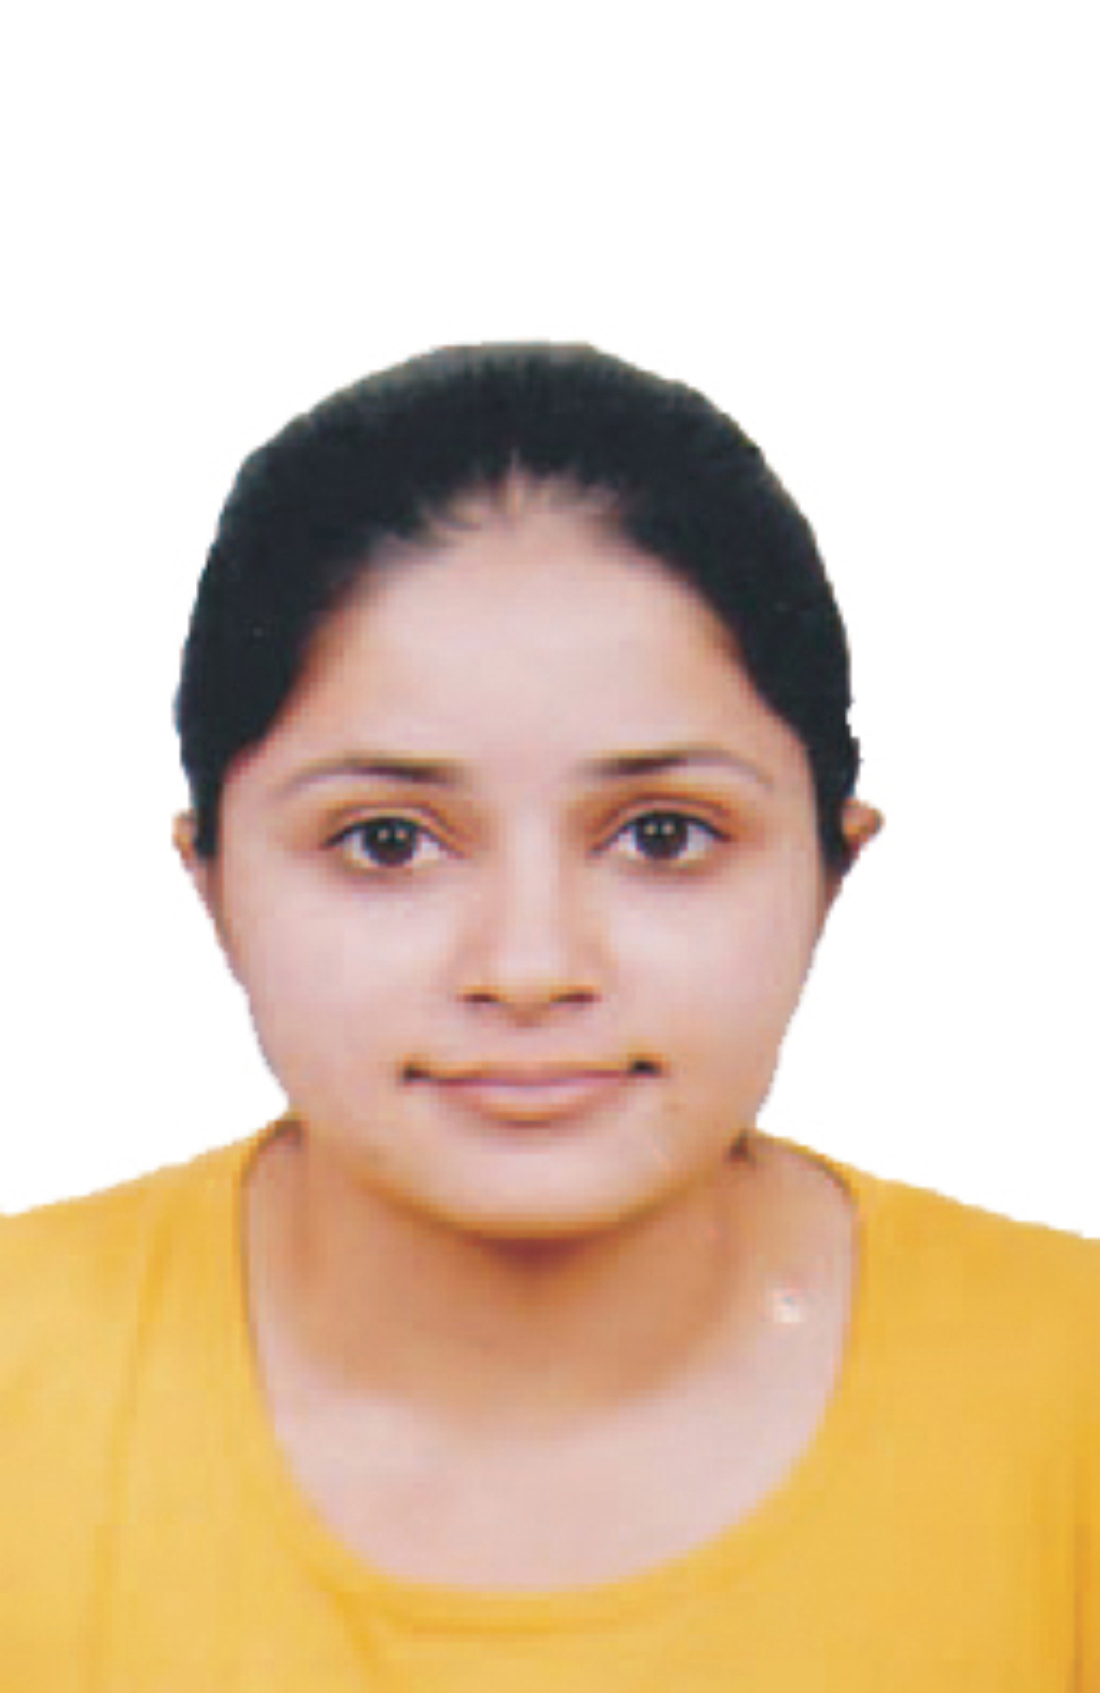 Chandni Sood securing Rank 7 in the CSIR NET Life Sciences Exam 2012